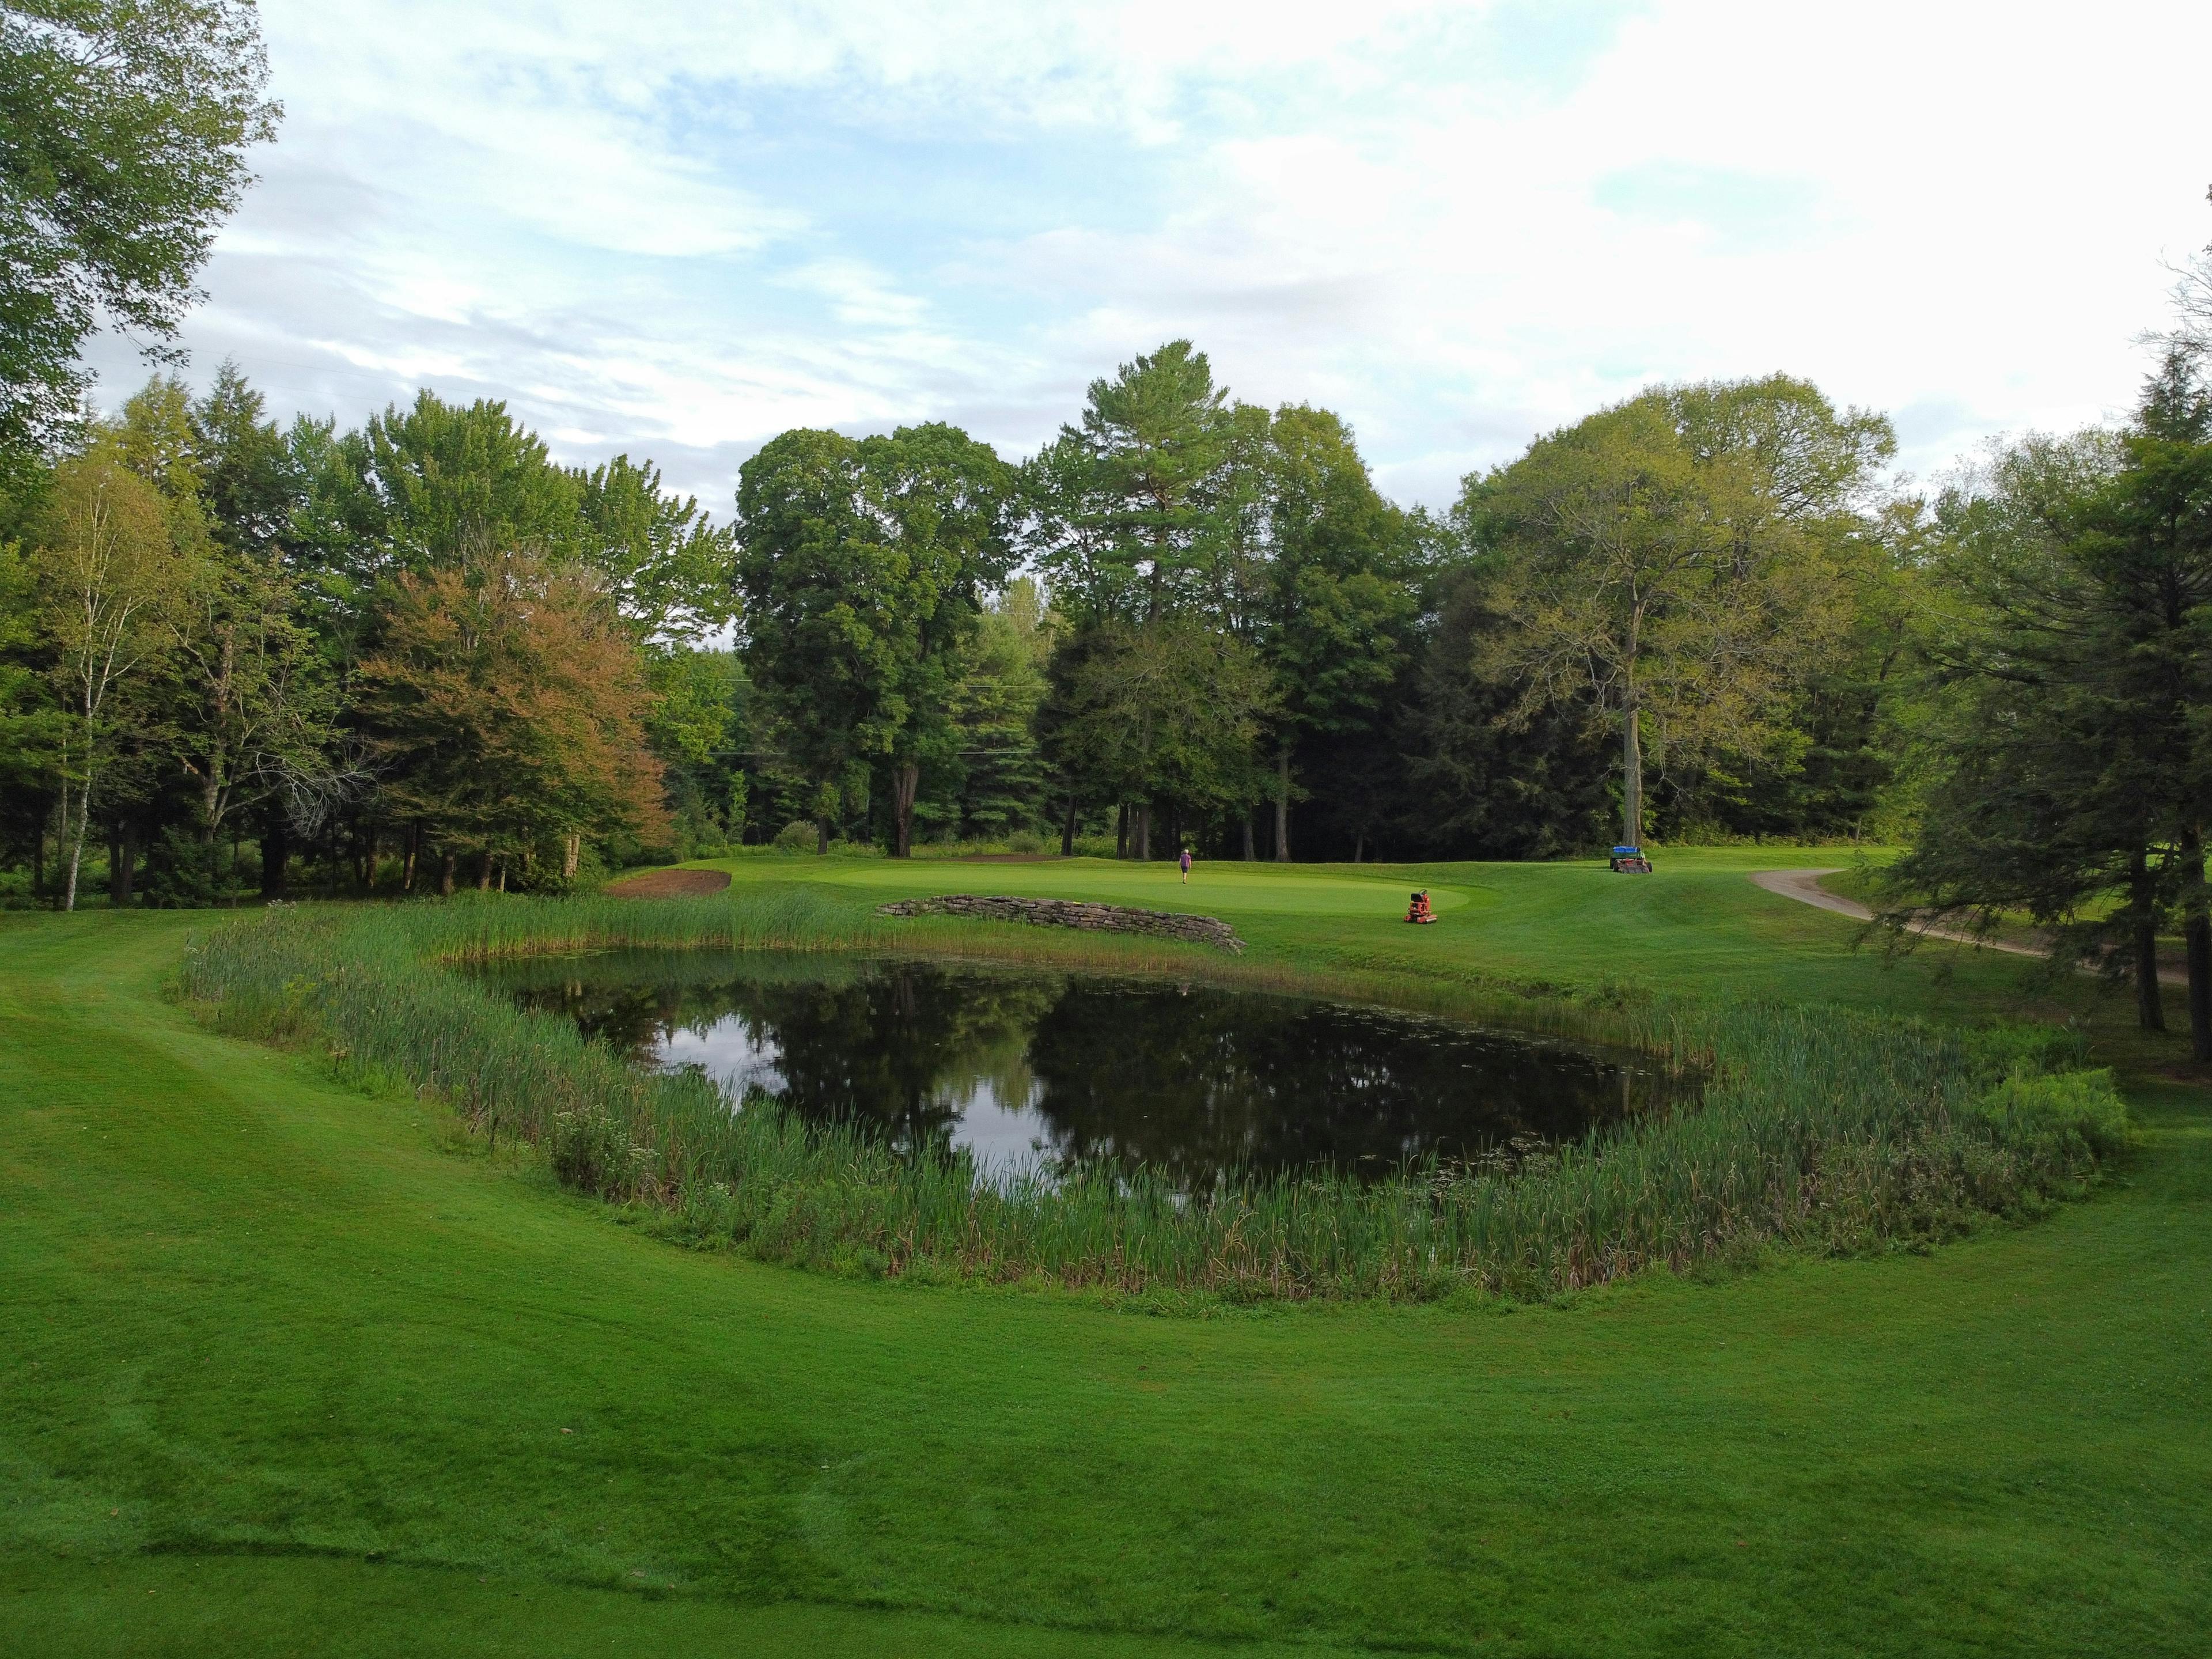 Hole number 5 on the North course